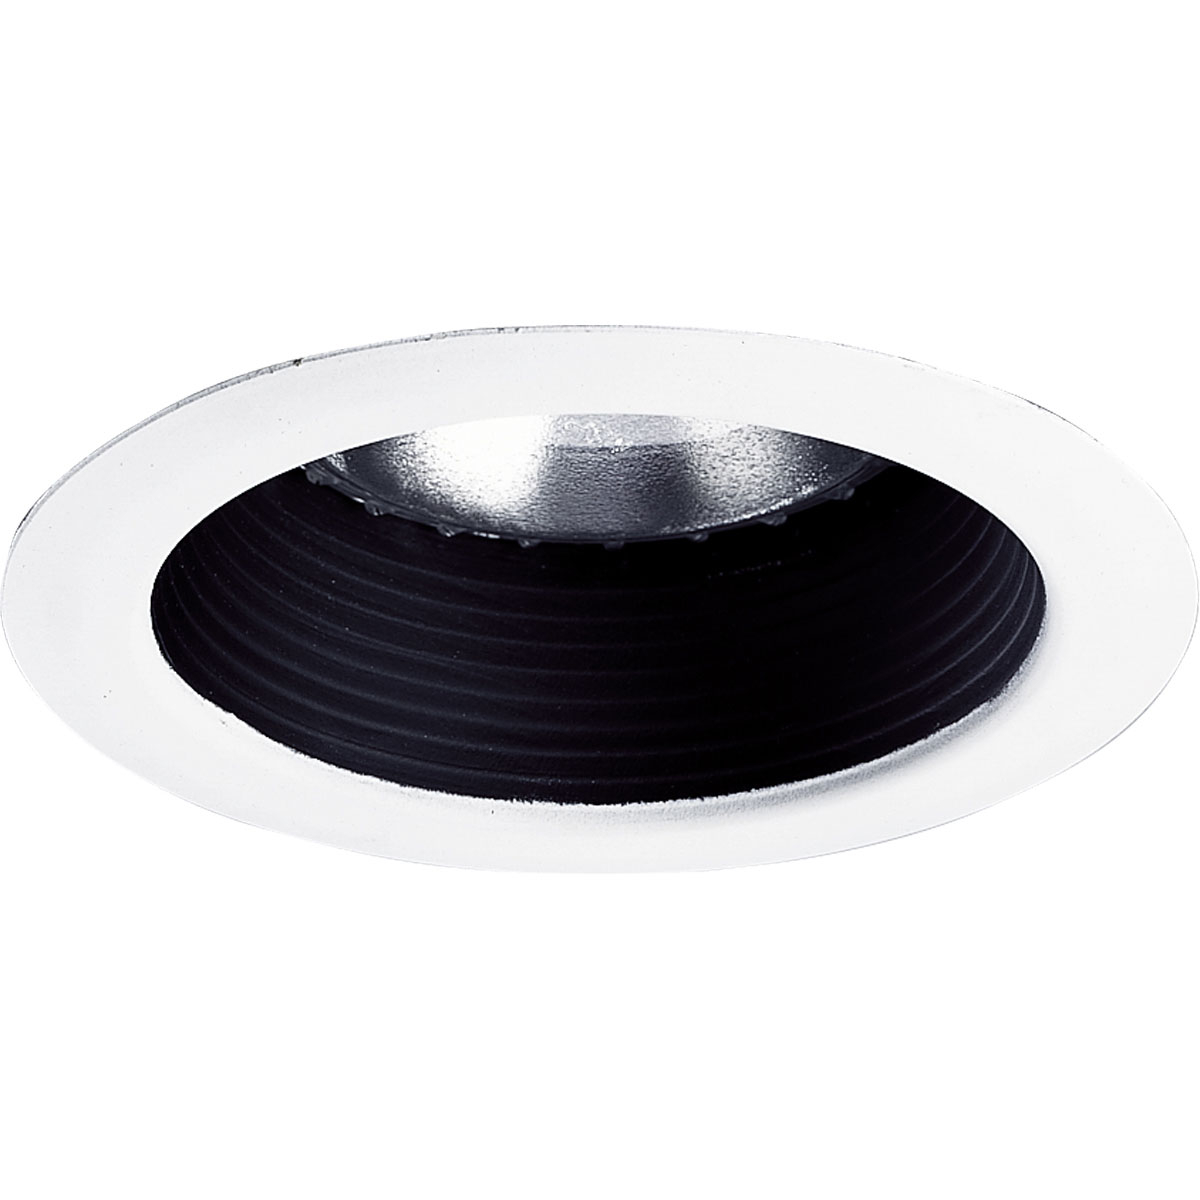 5 in Shallow Baffle Trim in a Black finish. One-piece construction with integral bright white powder painted metal flange.